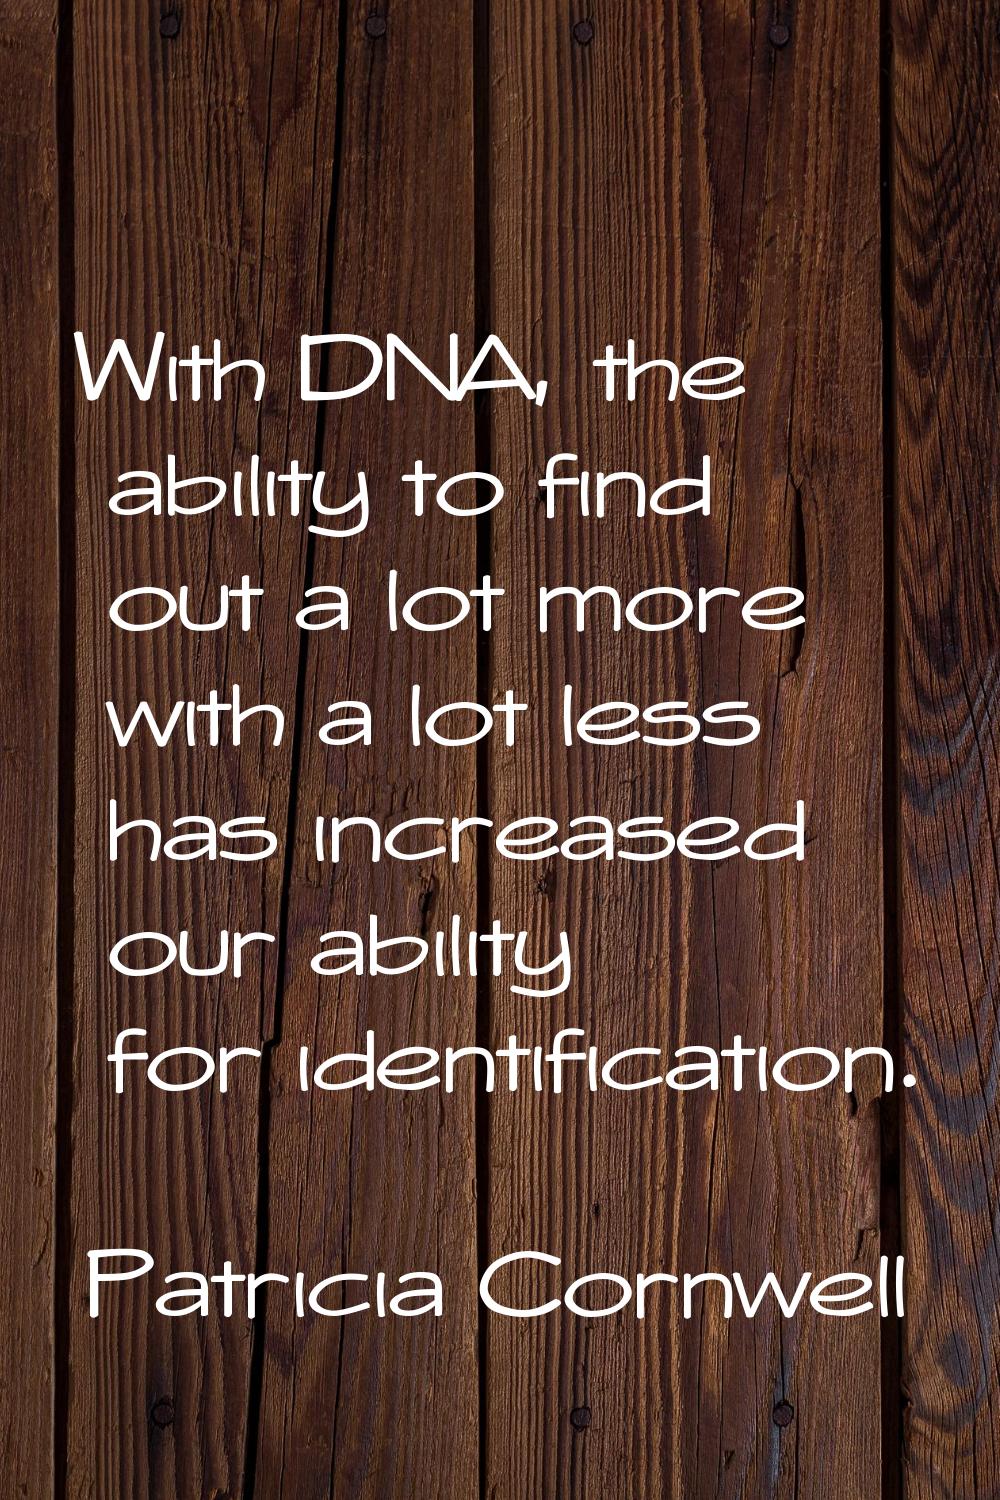 With DNA, the ability to find out a lot more with a lot less has increased our ability for identifi